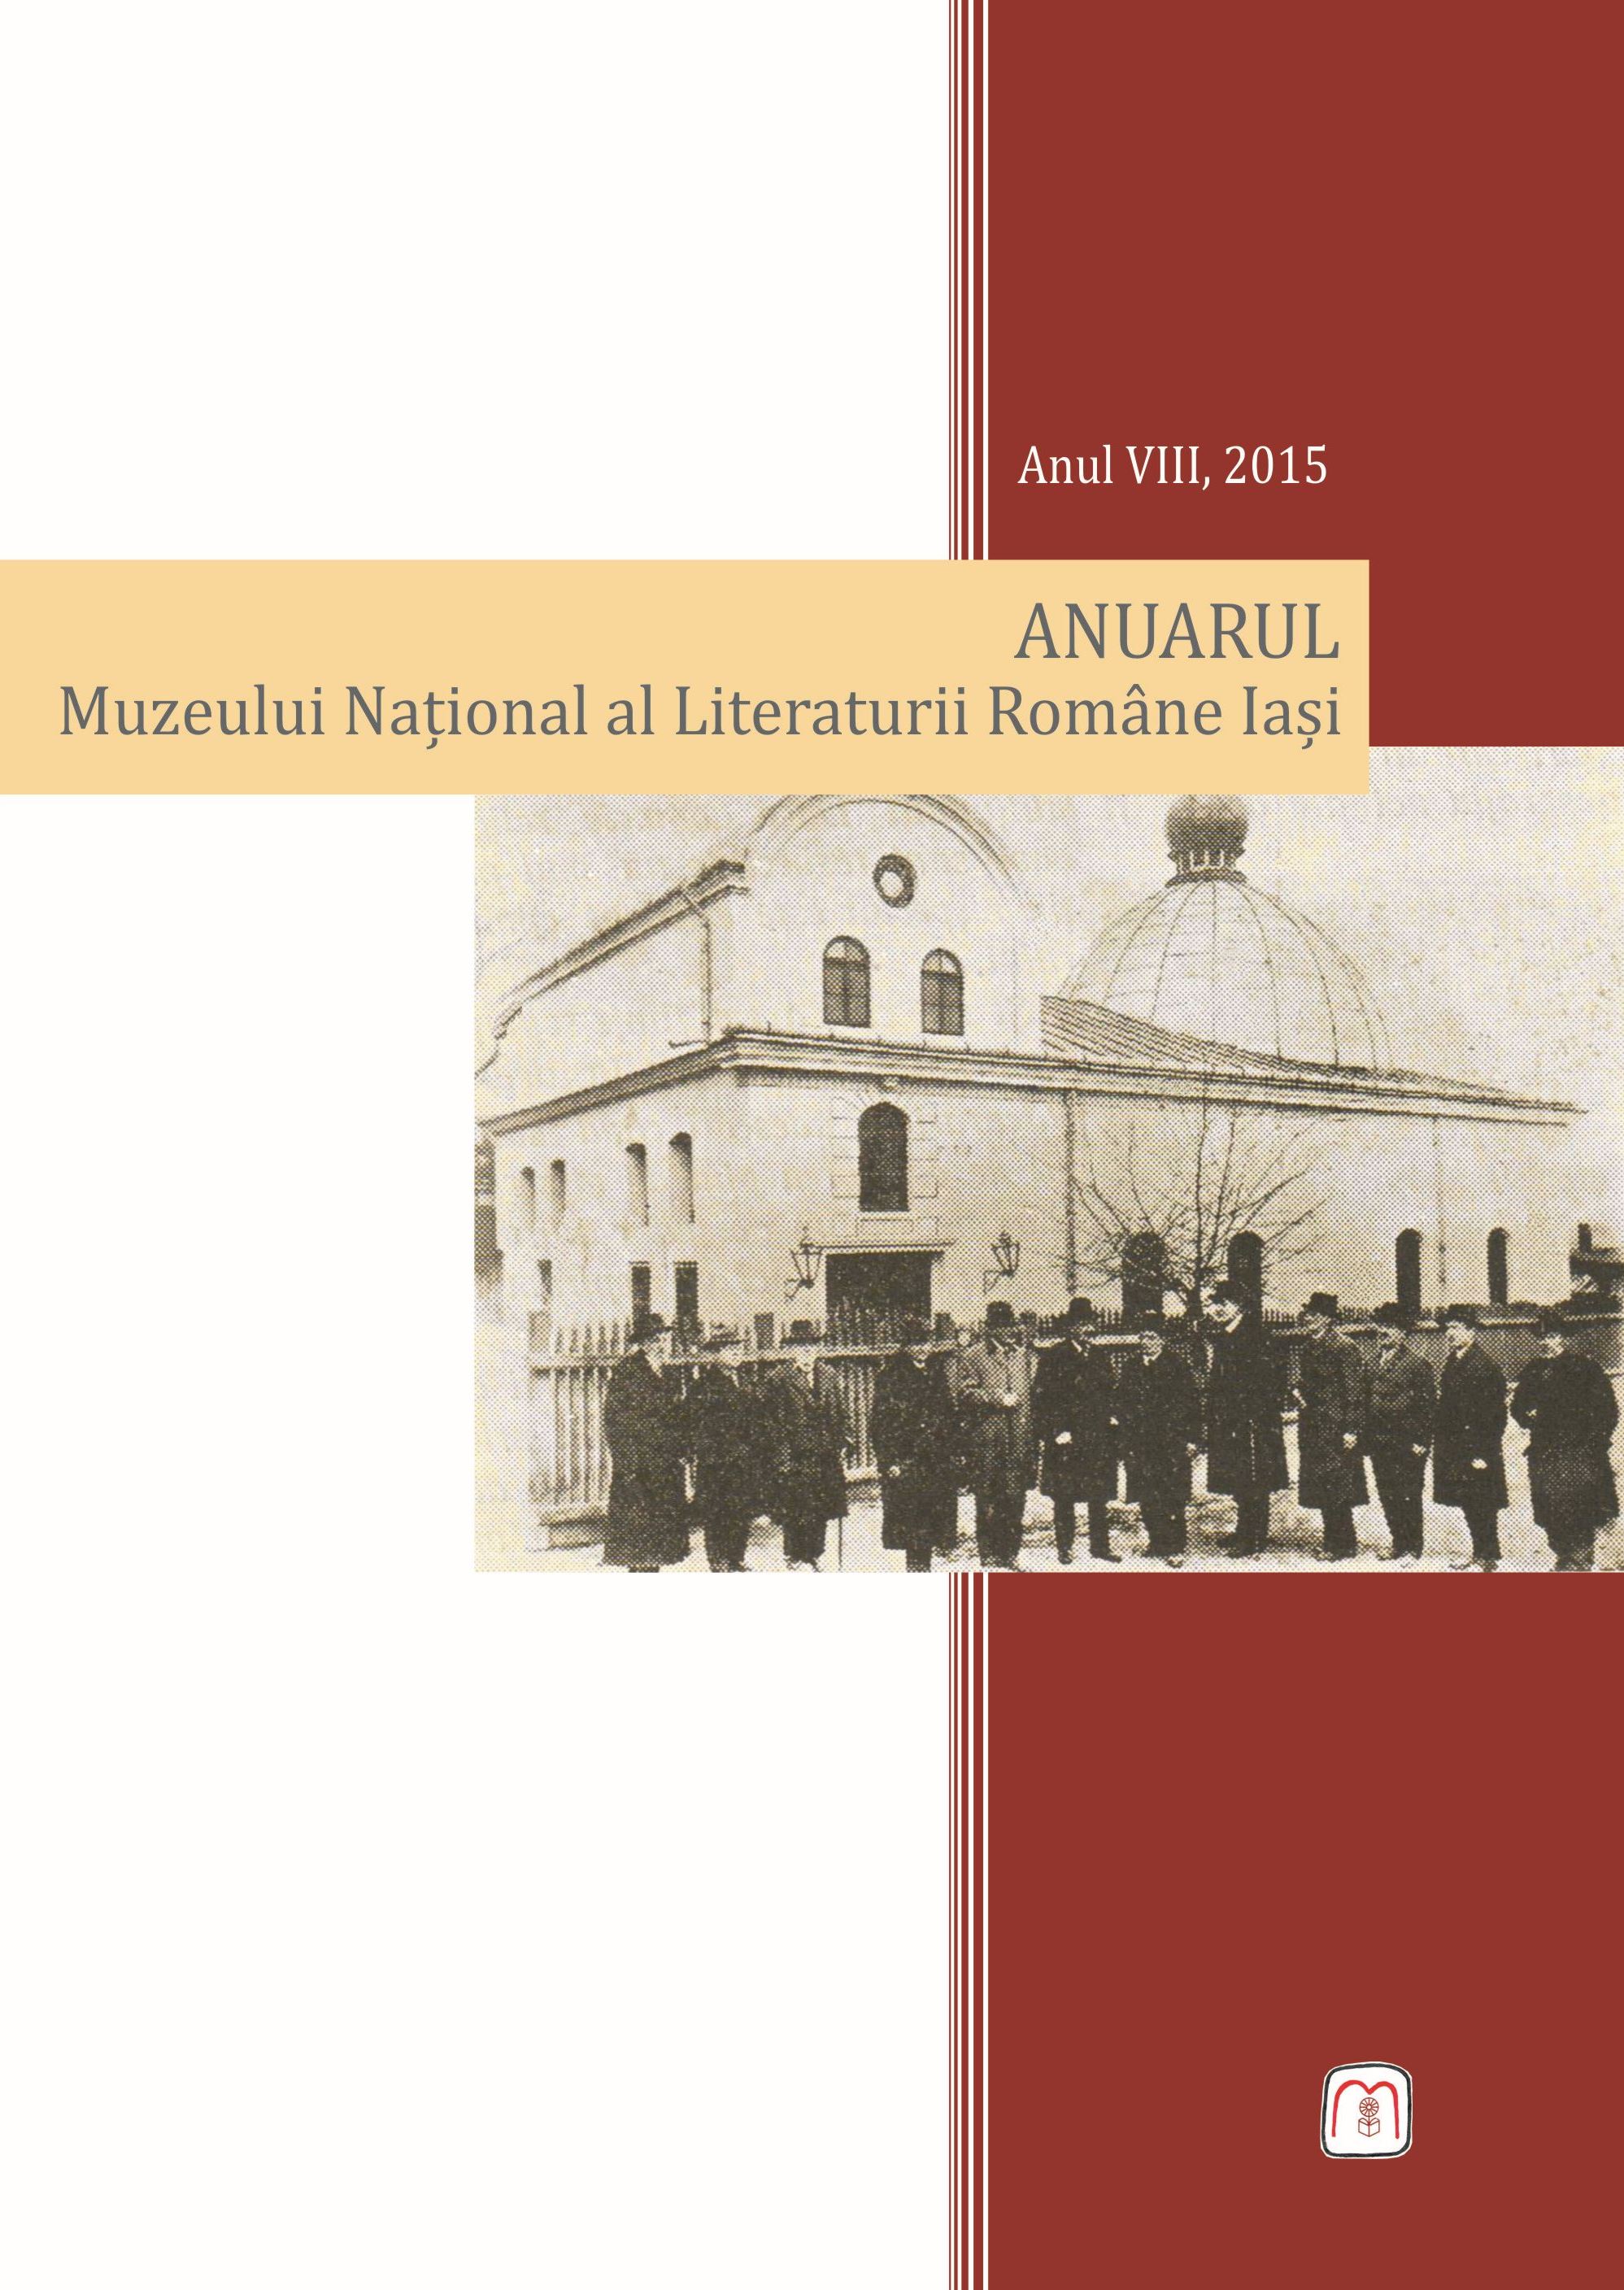 N. Iorga’s Unpublished Correspondence and Volumes with Various Dedications in the Collections of “Mihai Eminescu” Central University Library of Iași Cover Image